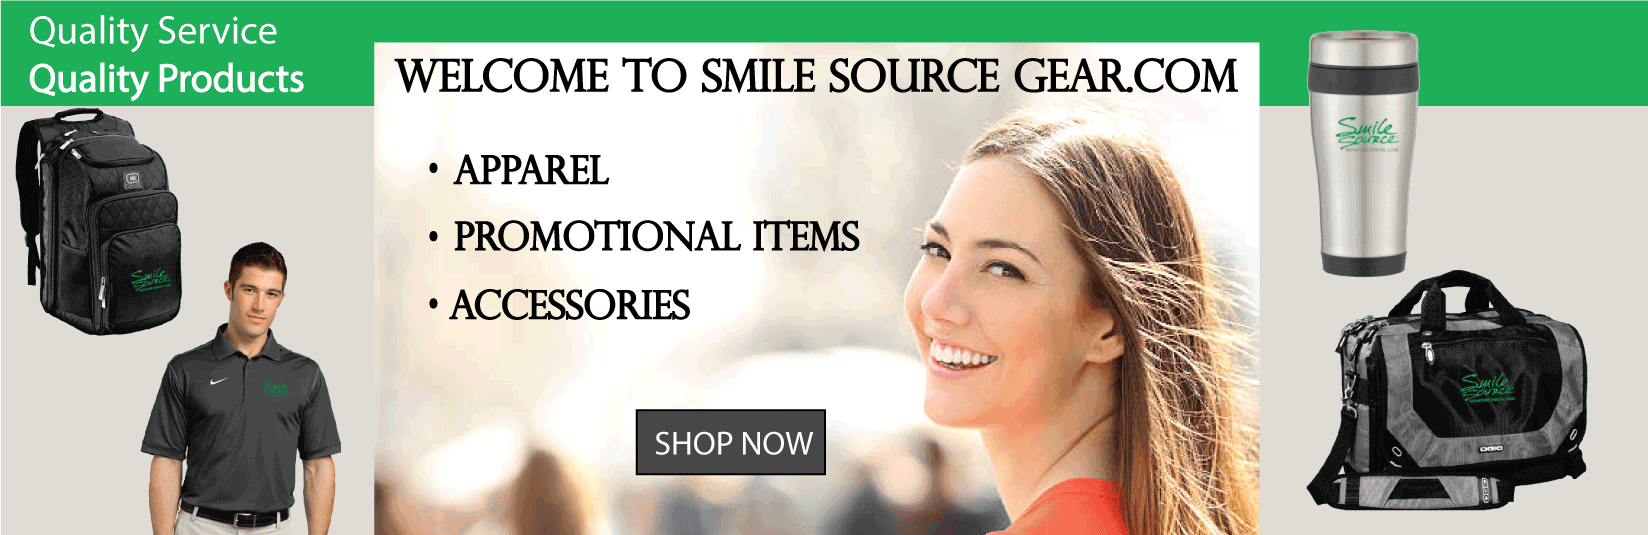 Shop Now for Smile Source Gear